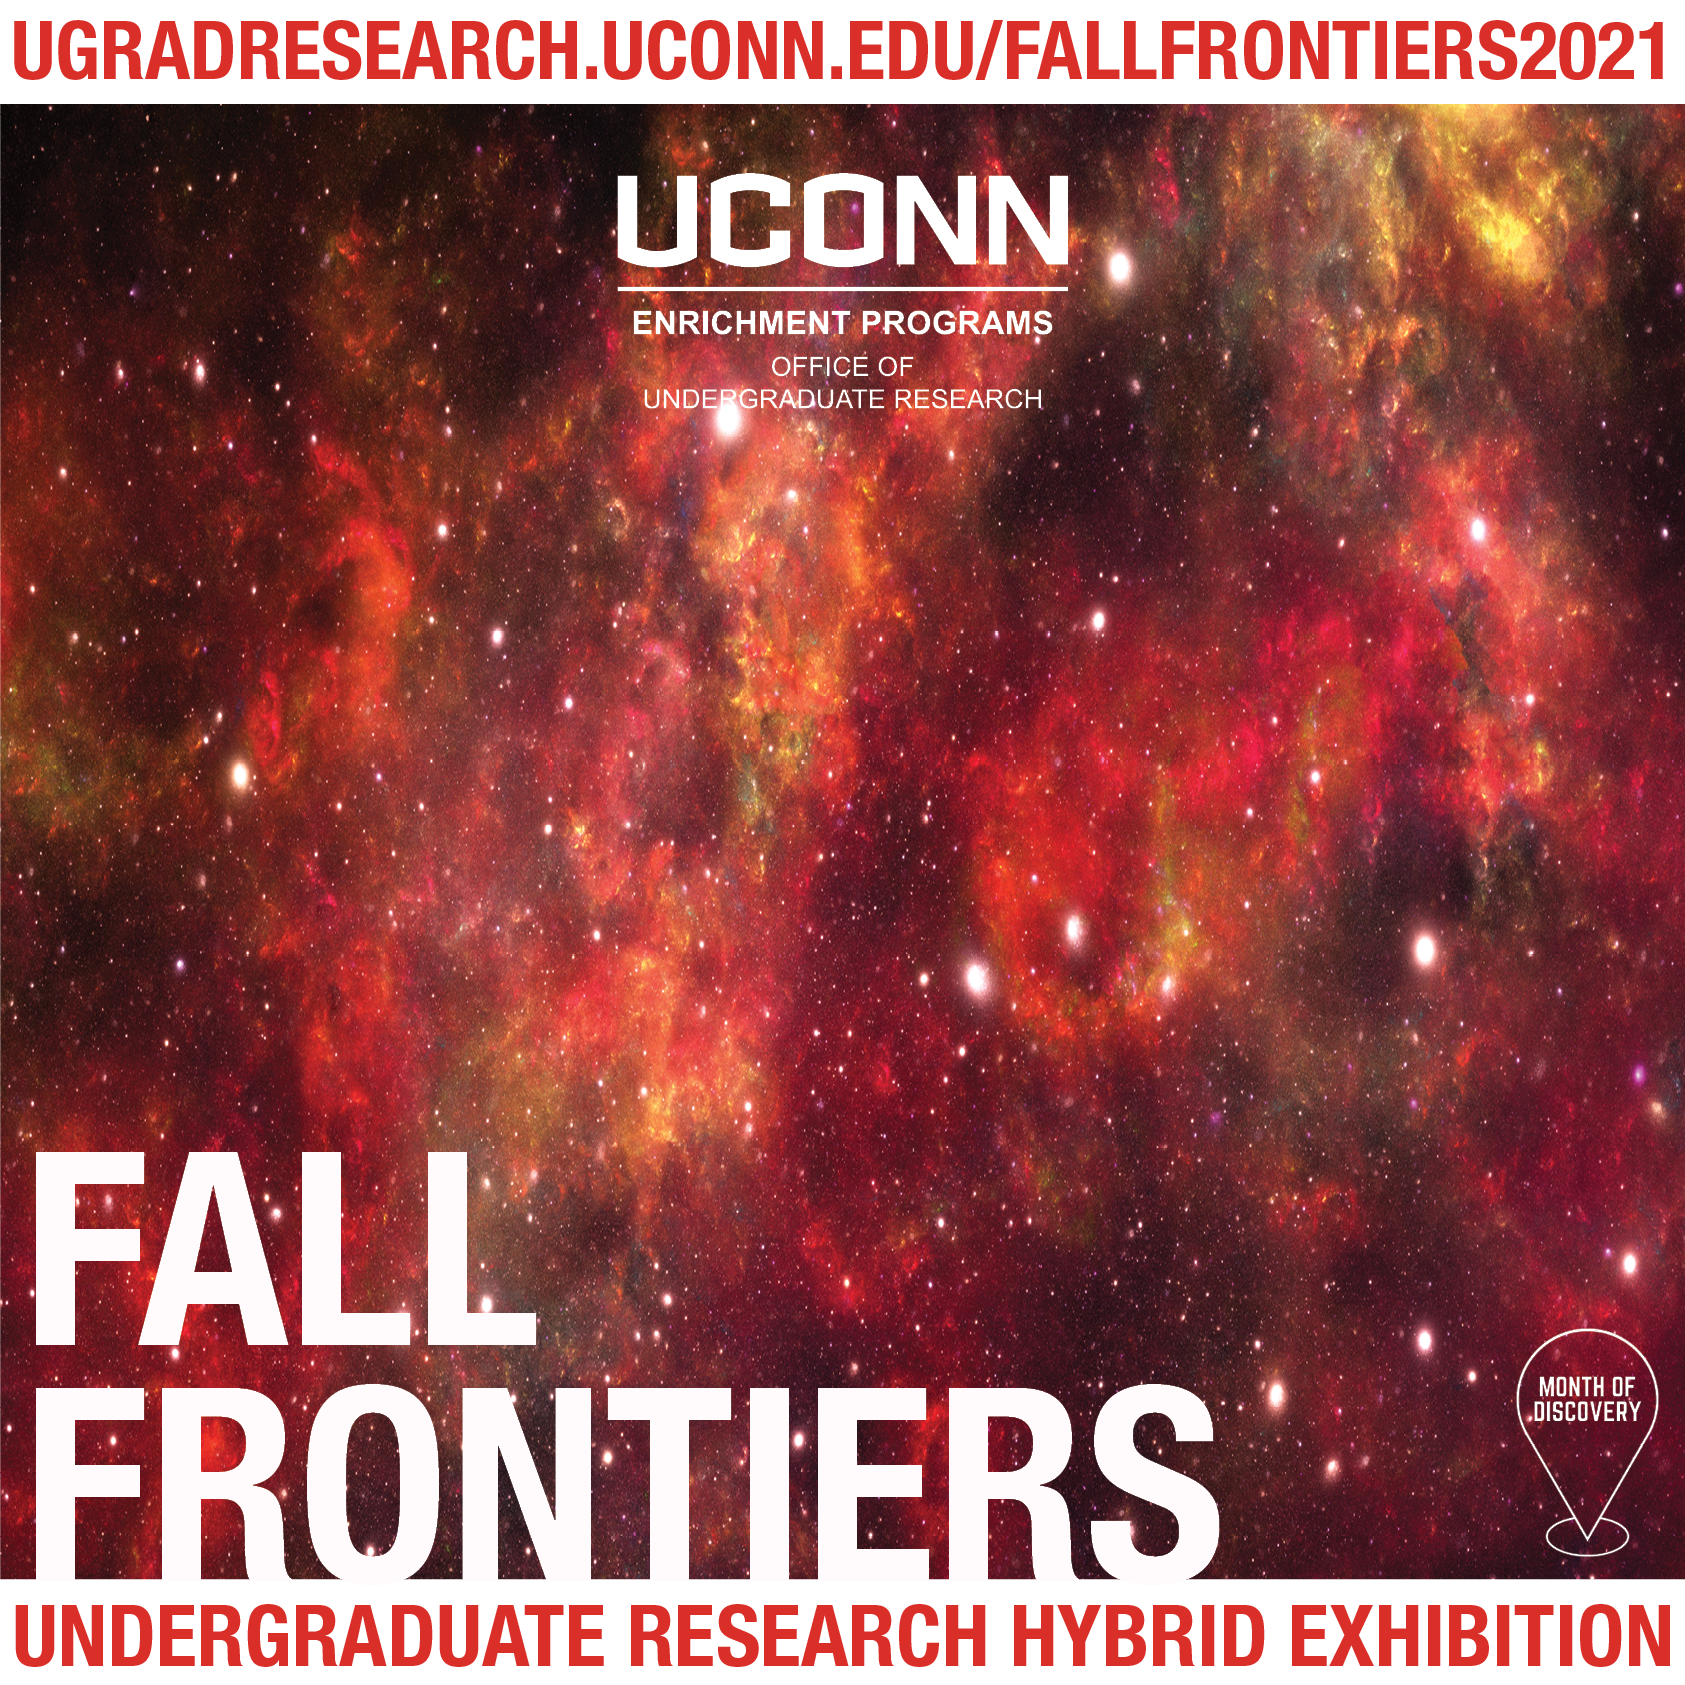 Over a red and gold image of a galaxy, text reads, Fall Frontiers Undergraduate Research Hybrid Exhibition. The image also lists the exhibition URL, ugradresearch.uconn.edu/fallfrontiers2021